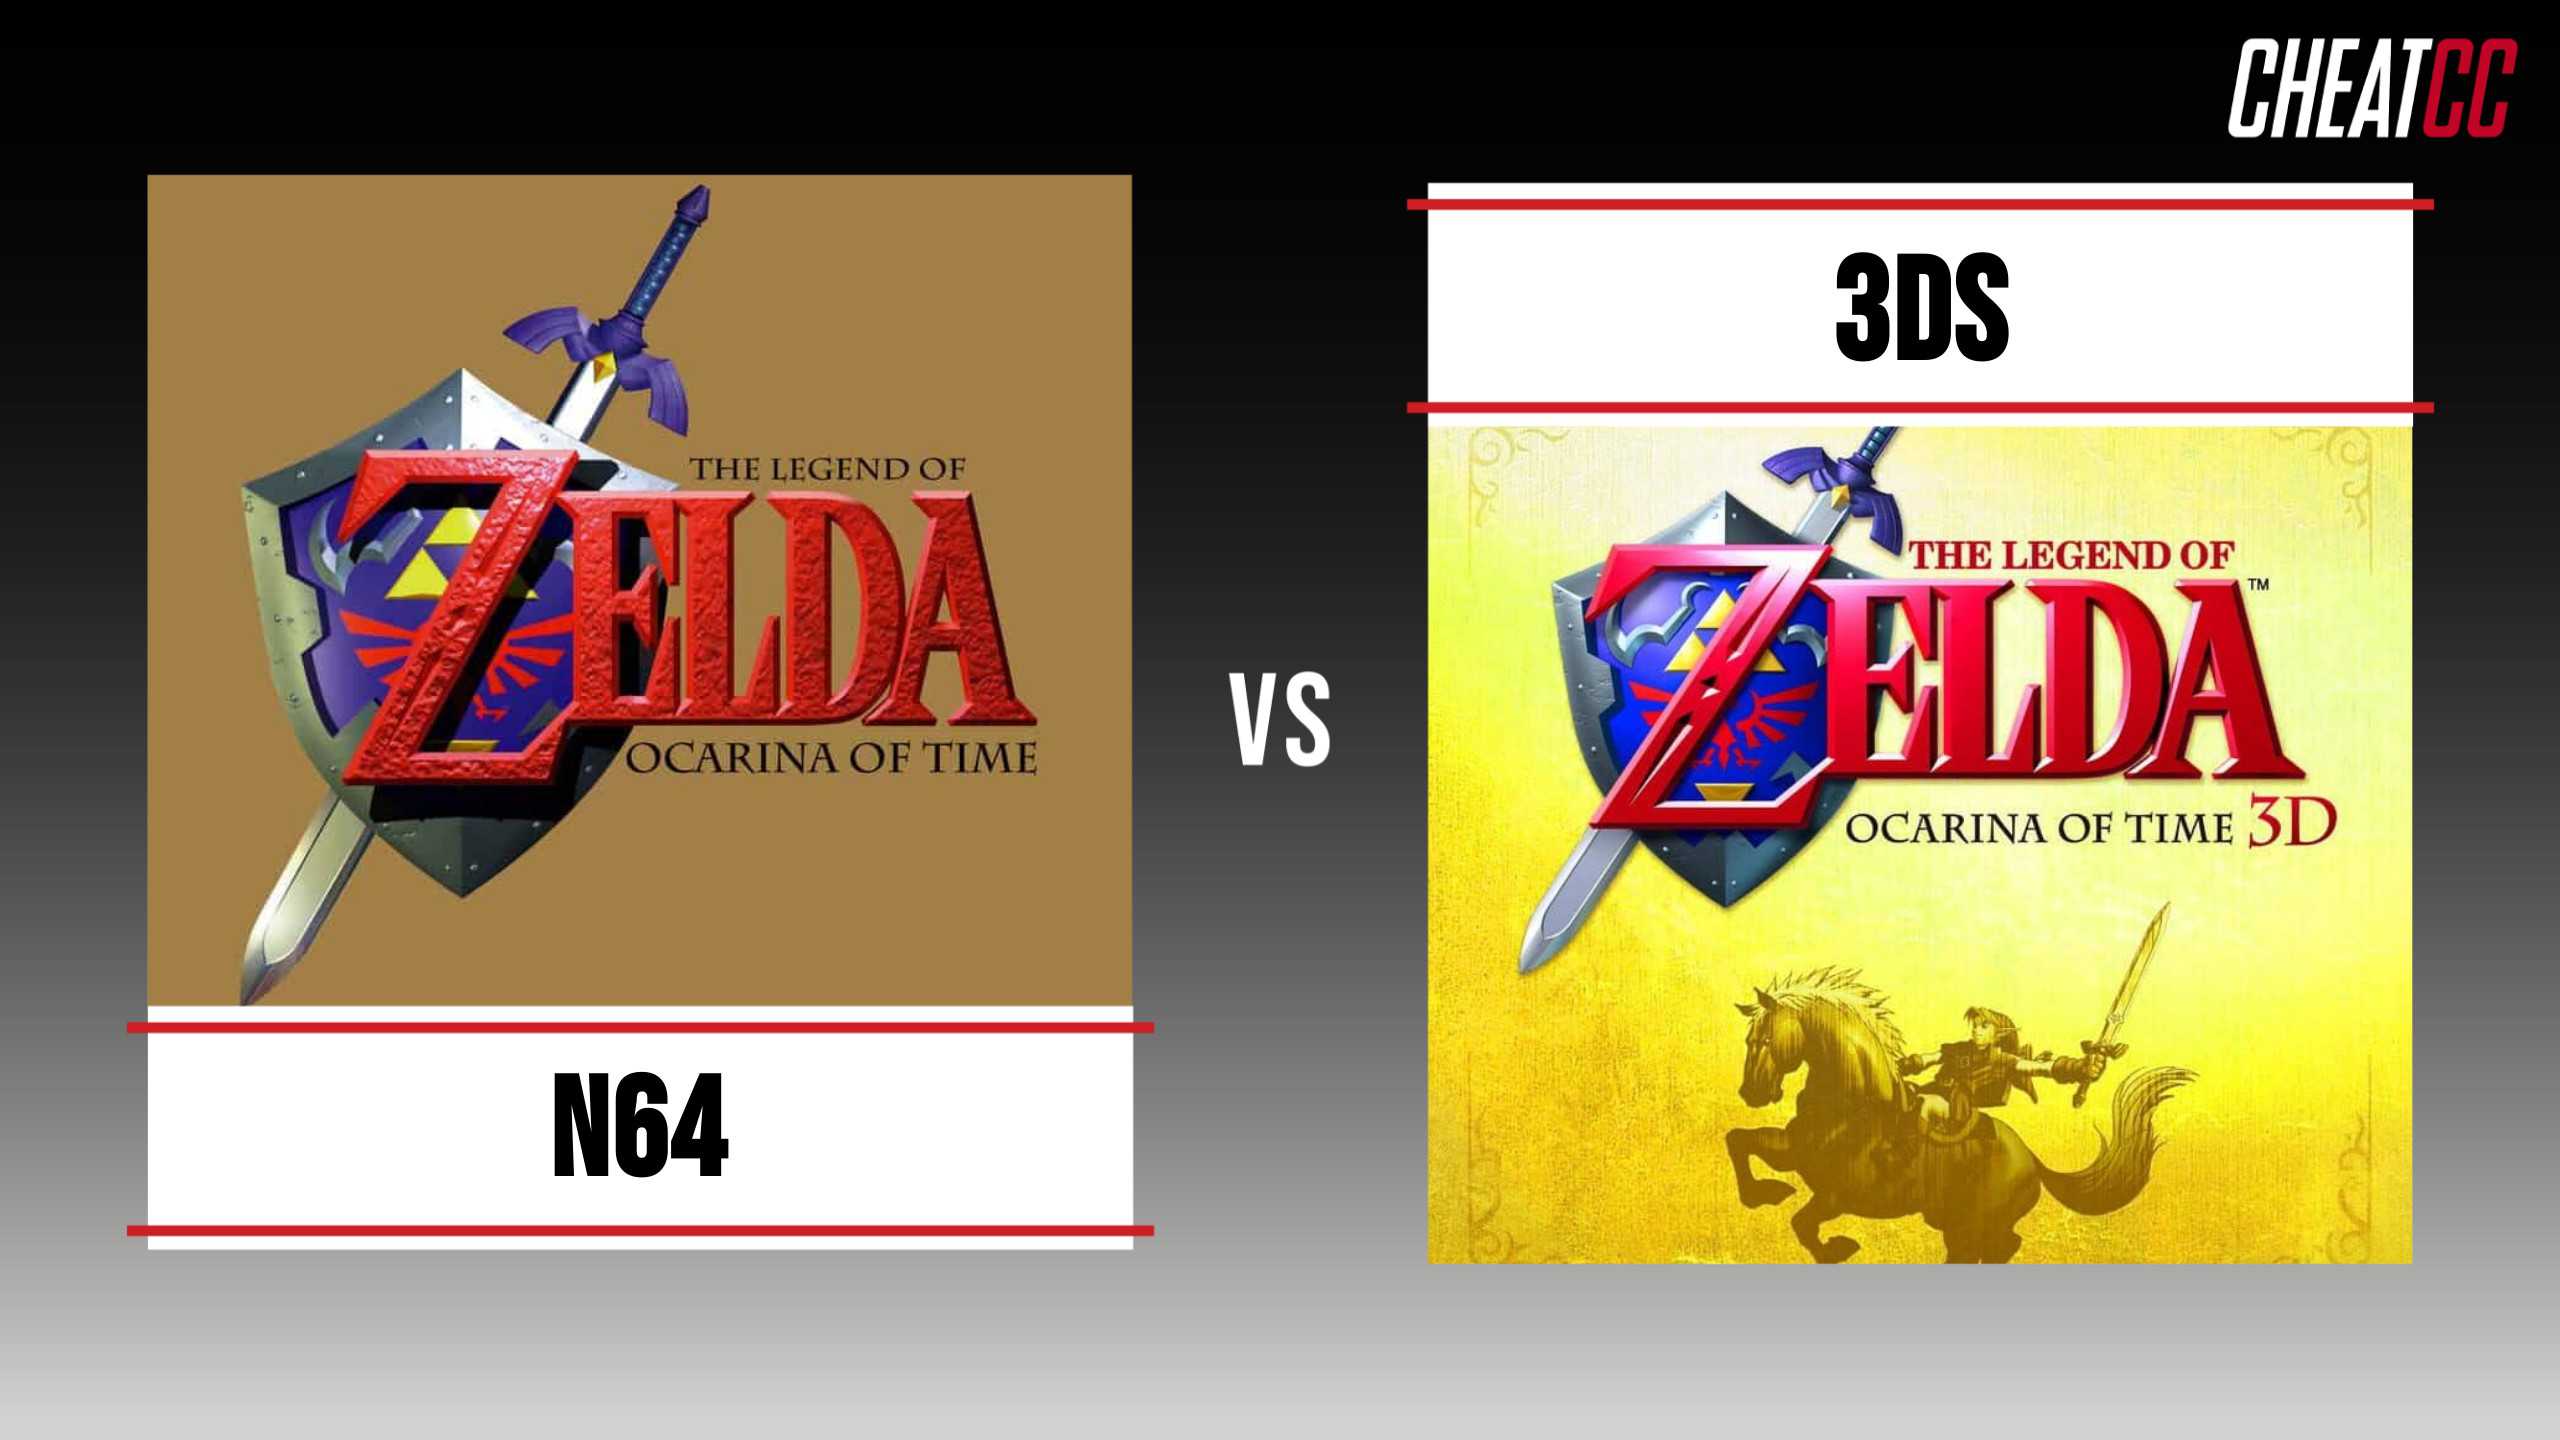 Ocarina of Time on N64 vs 3DS